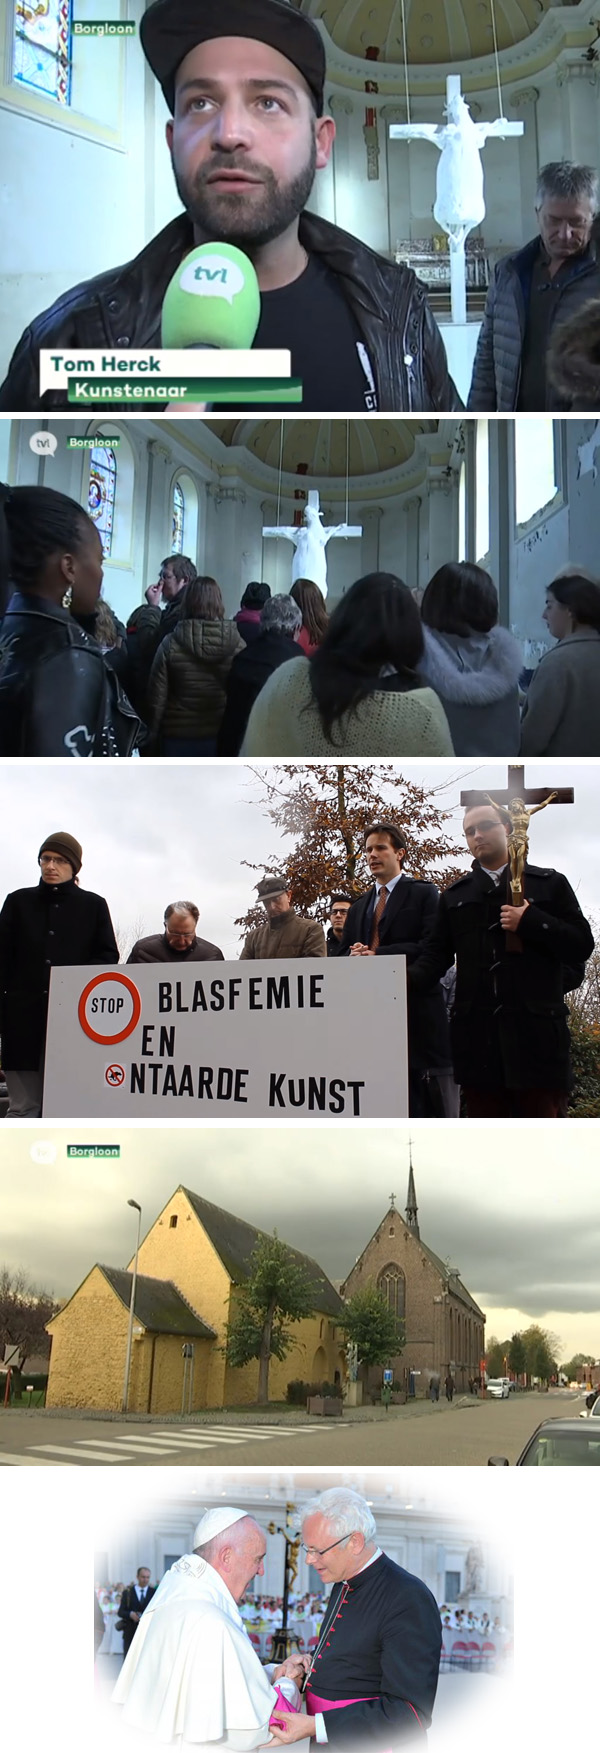 Photo collage of Tom Herck being interviewed, protests against his blasphemous piece of 'art', a Belgian church, and Bishop Patrick Hoogmartens shaking hands with Pope Francis